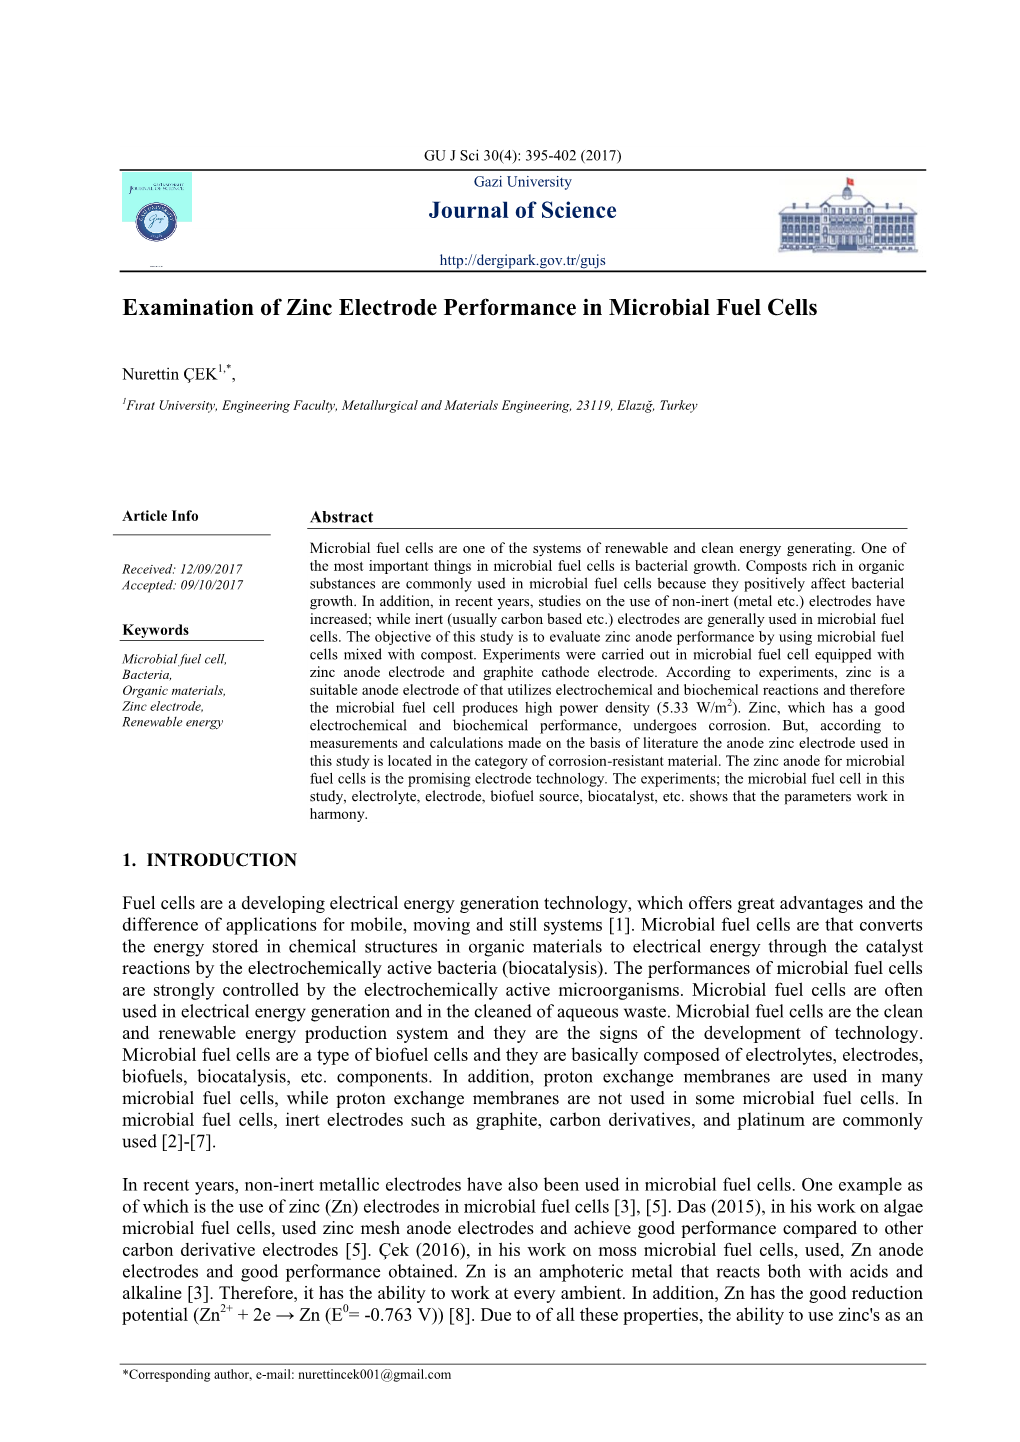 Journal of Science Examination of Zinc Electrode Performance In